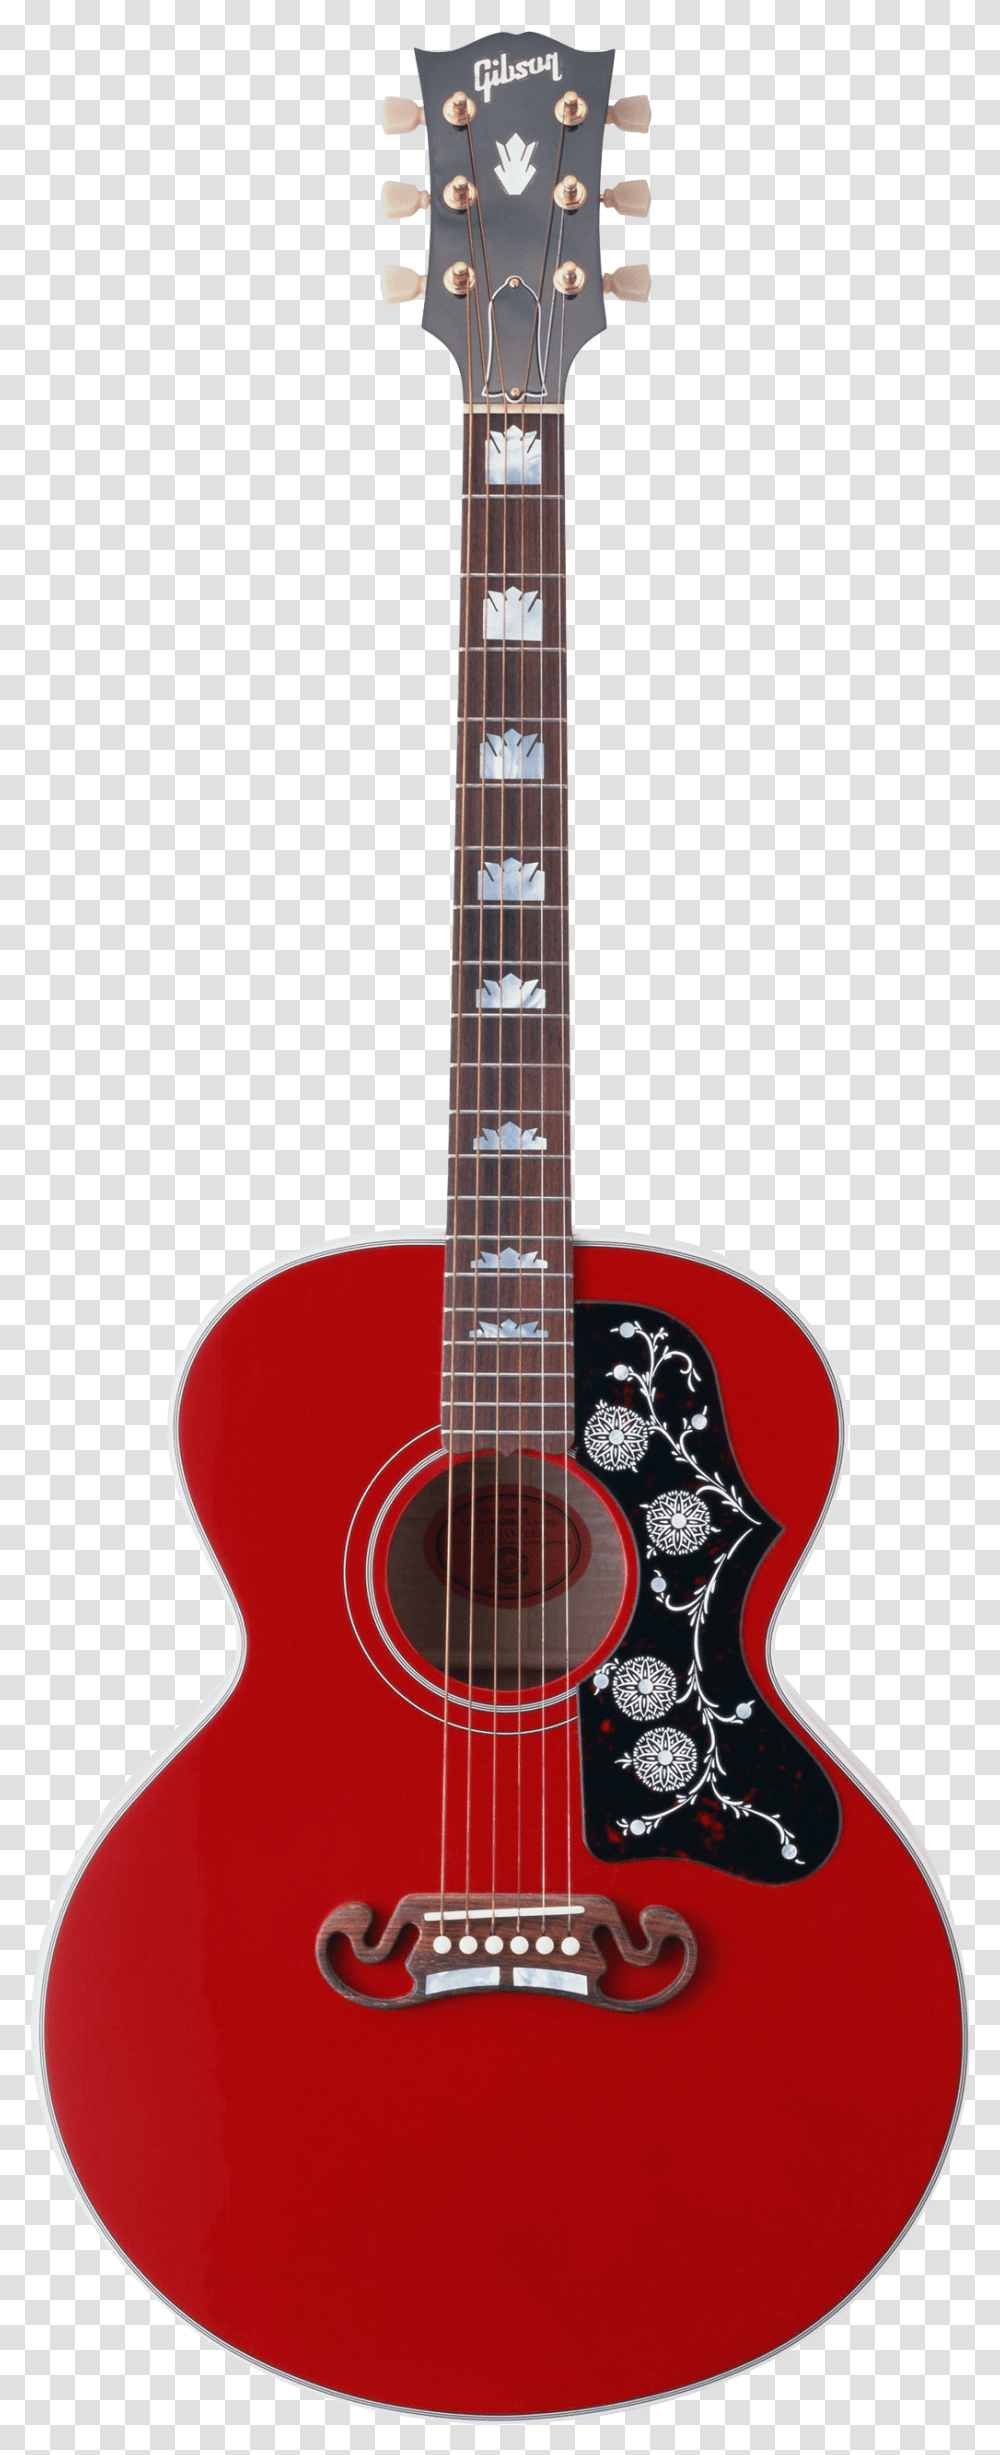 Guitar Images Free Picture Download Guitar, Leisure Activities, Musical Instrument, Bass Guitar, Electric Guitar Transparent Png